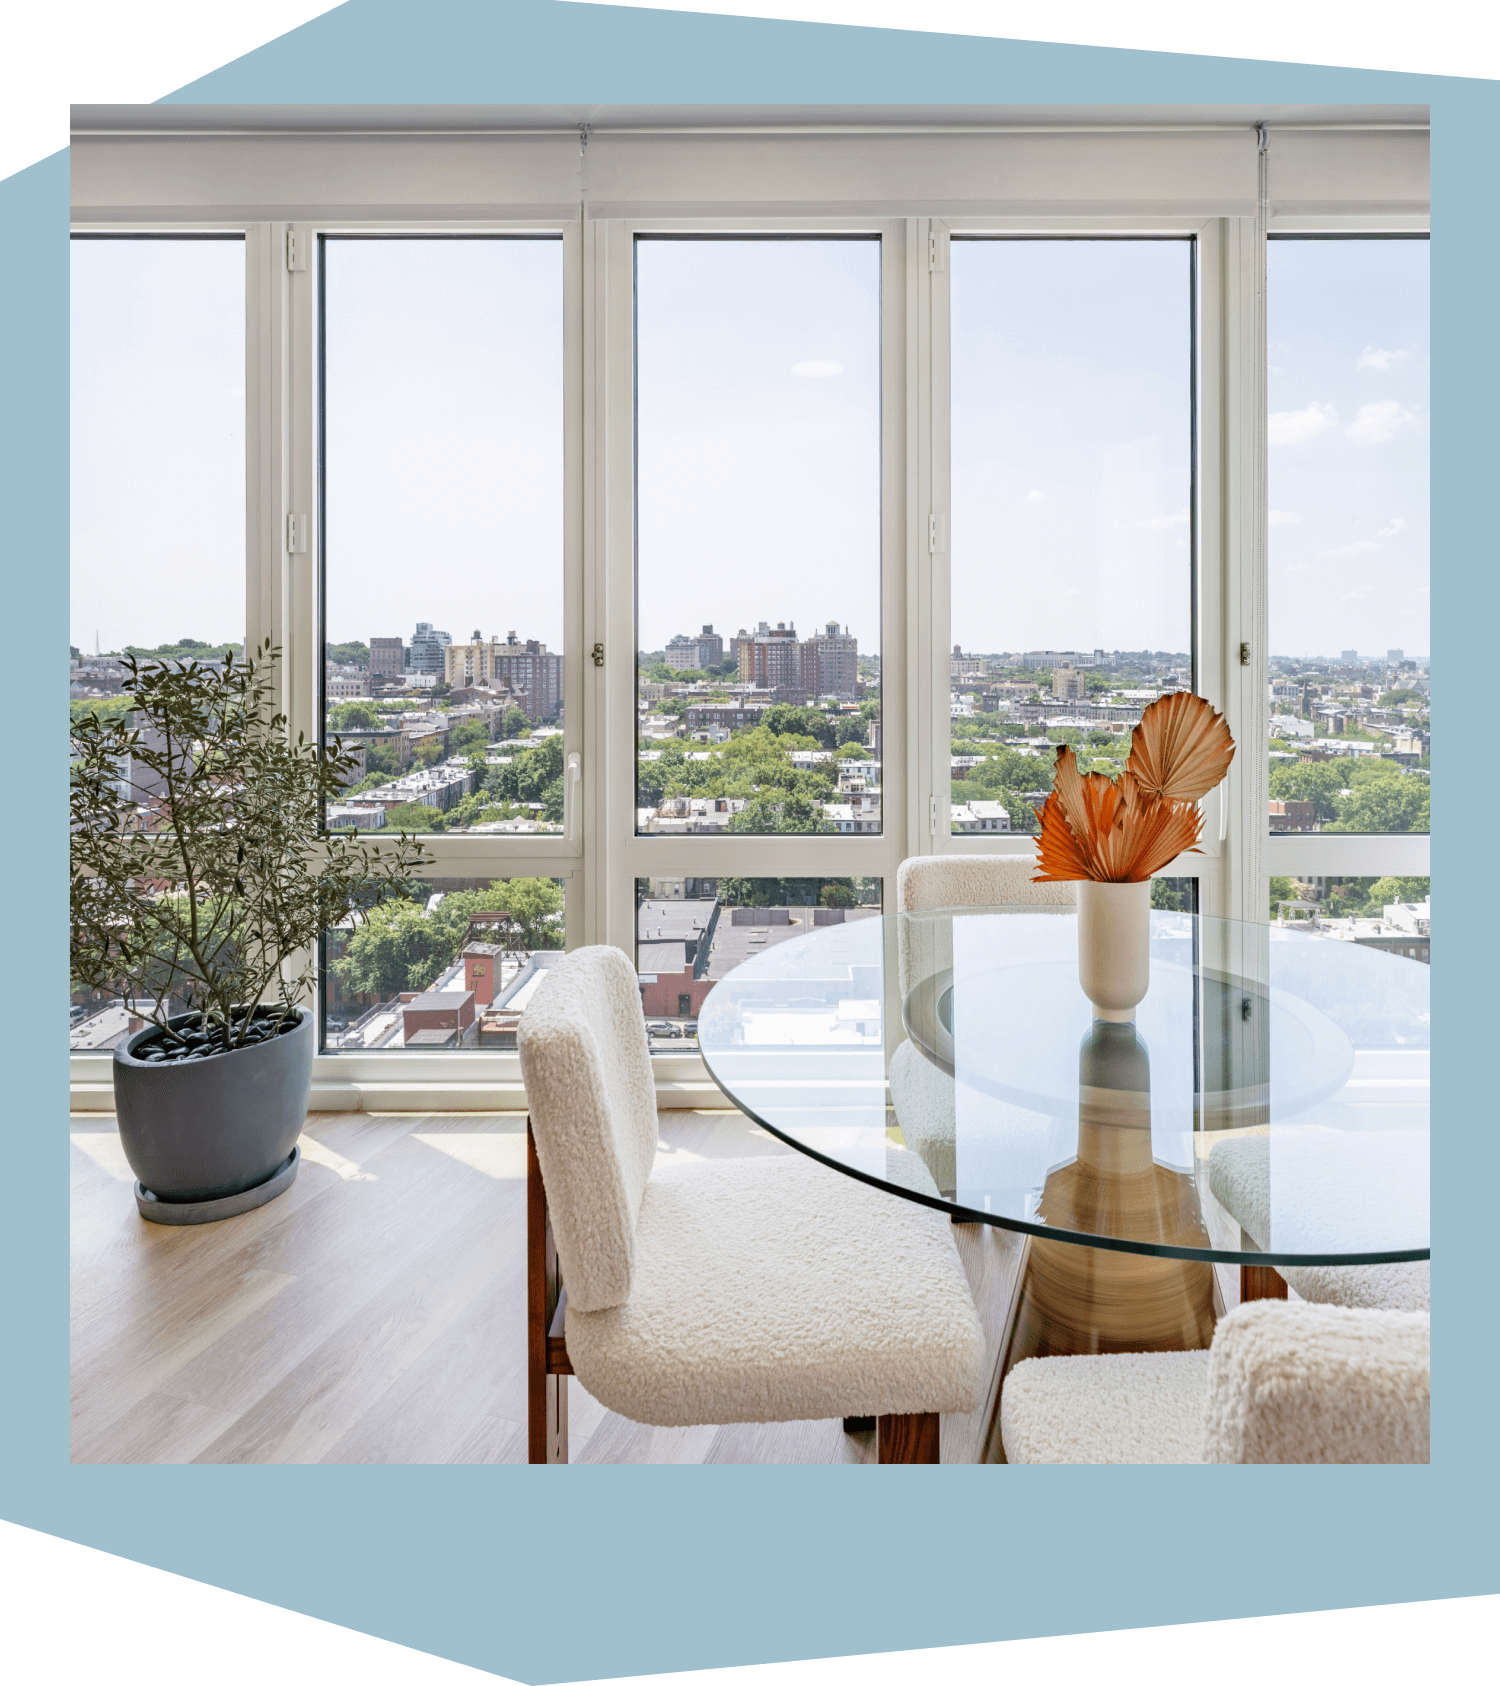 View from inside an apartment at 595 Dean St looking out at Prospect Heights with the dining area in the foreground.